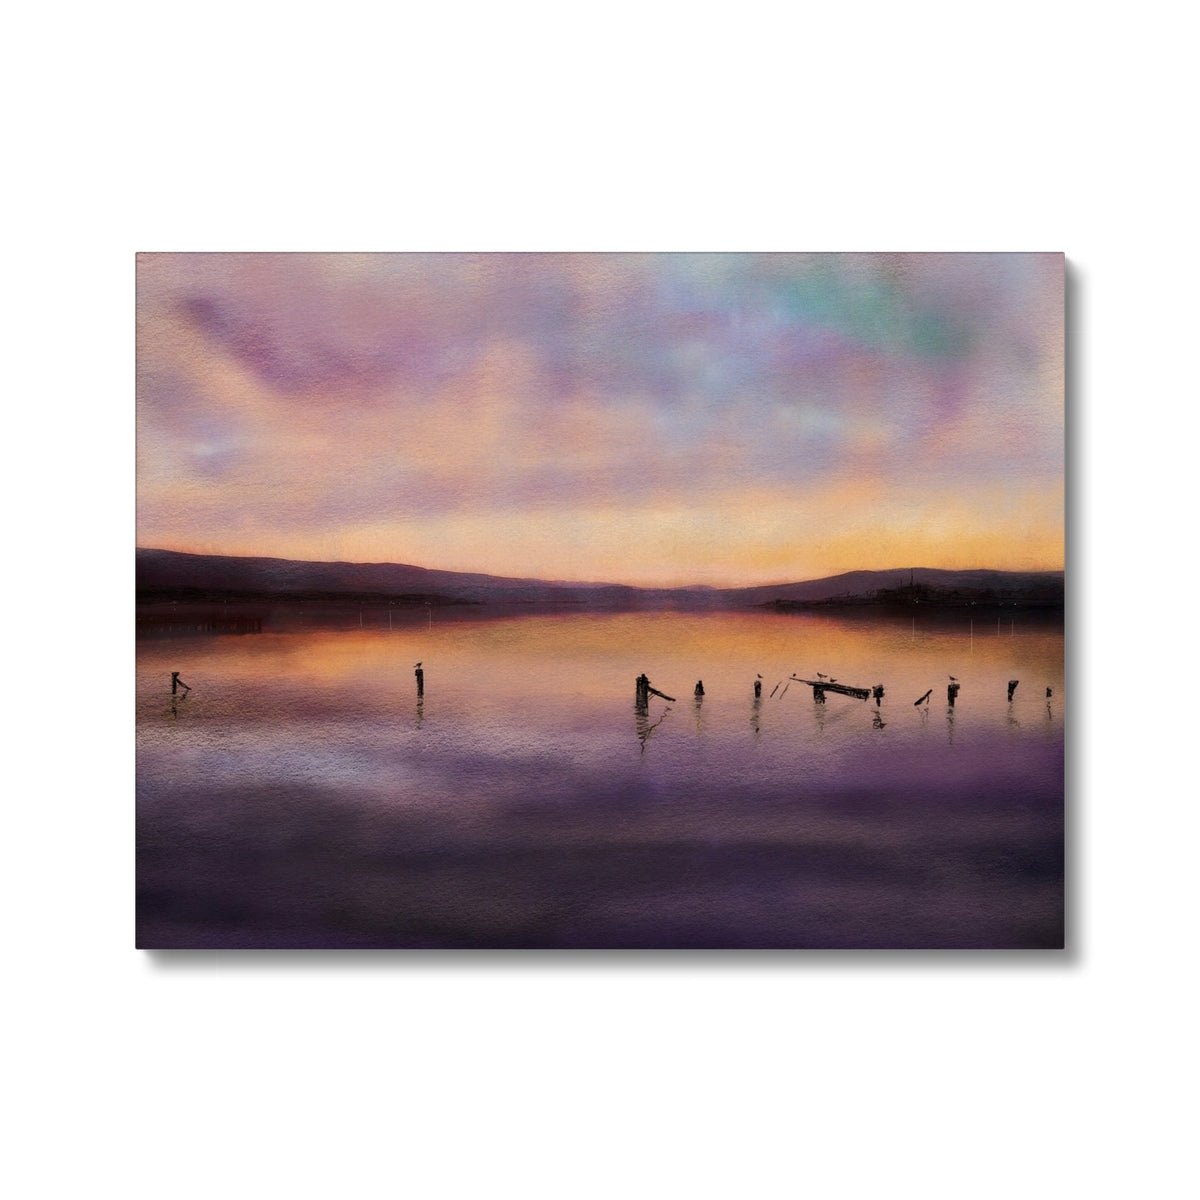 Admiralty Jetty Dusk Painting | Canvas From Scotland-Contemporary Stretched Canvas Prints-River Clyde Art Gallery-24"x18"-Paintings, Prints, Homeware, Art Gifts From Scotland By Scottish Artist Kevin Hunter